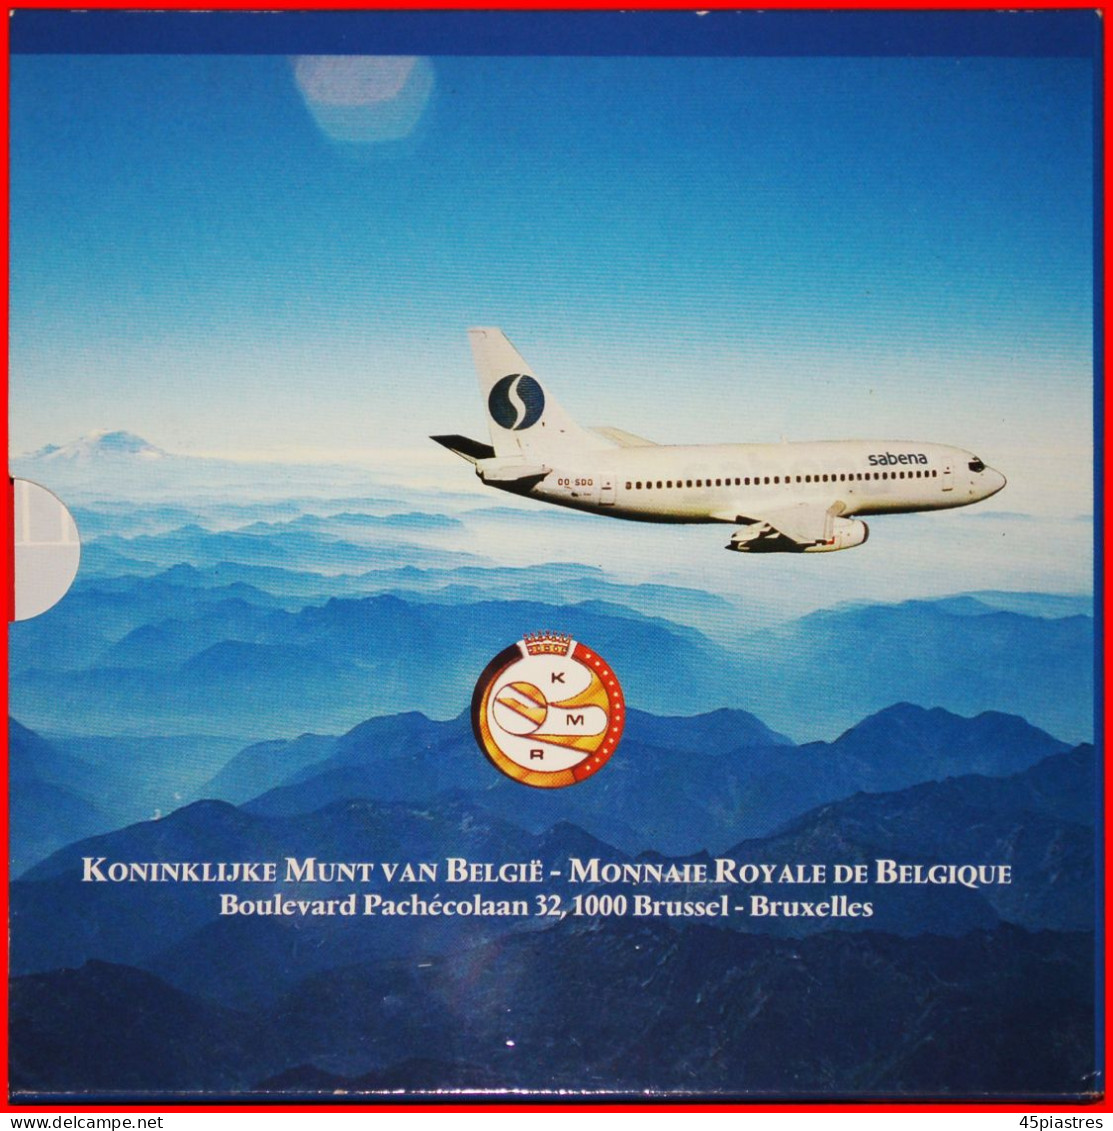 * PLANE 1923 - SWITZERLAND 1995: BELGIUM  MINT SET 1998 10 COINS WITH MEDAL!  · LOW START · NO RESERVE!